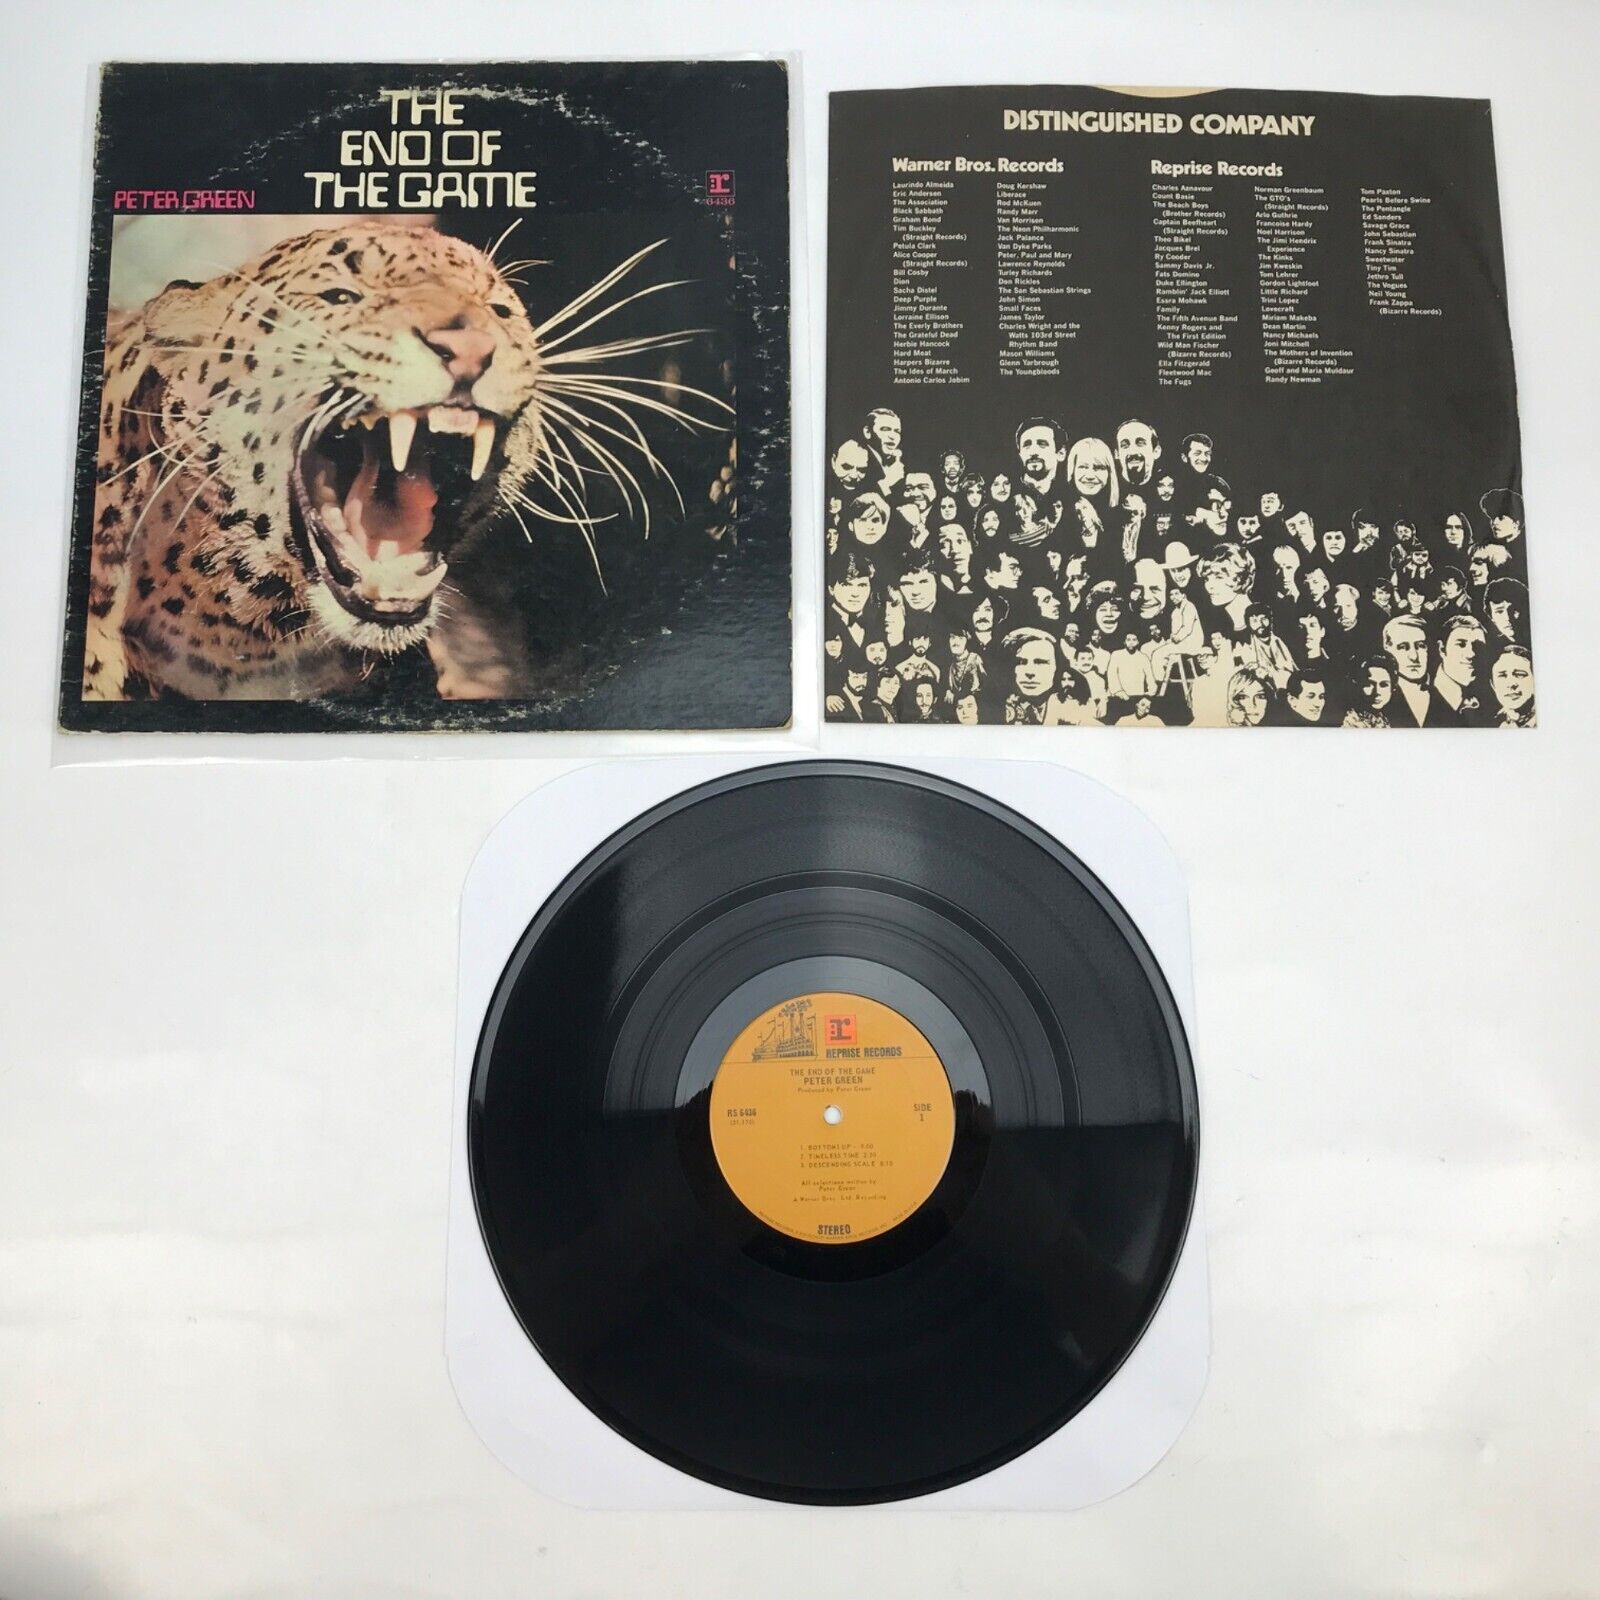 Peter Green The End of The Game LP Vinyl Record Reprise ‎RS 6436 1970